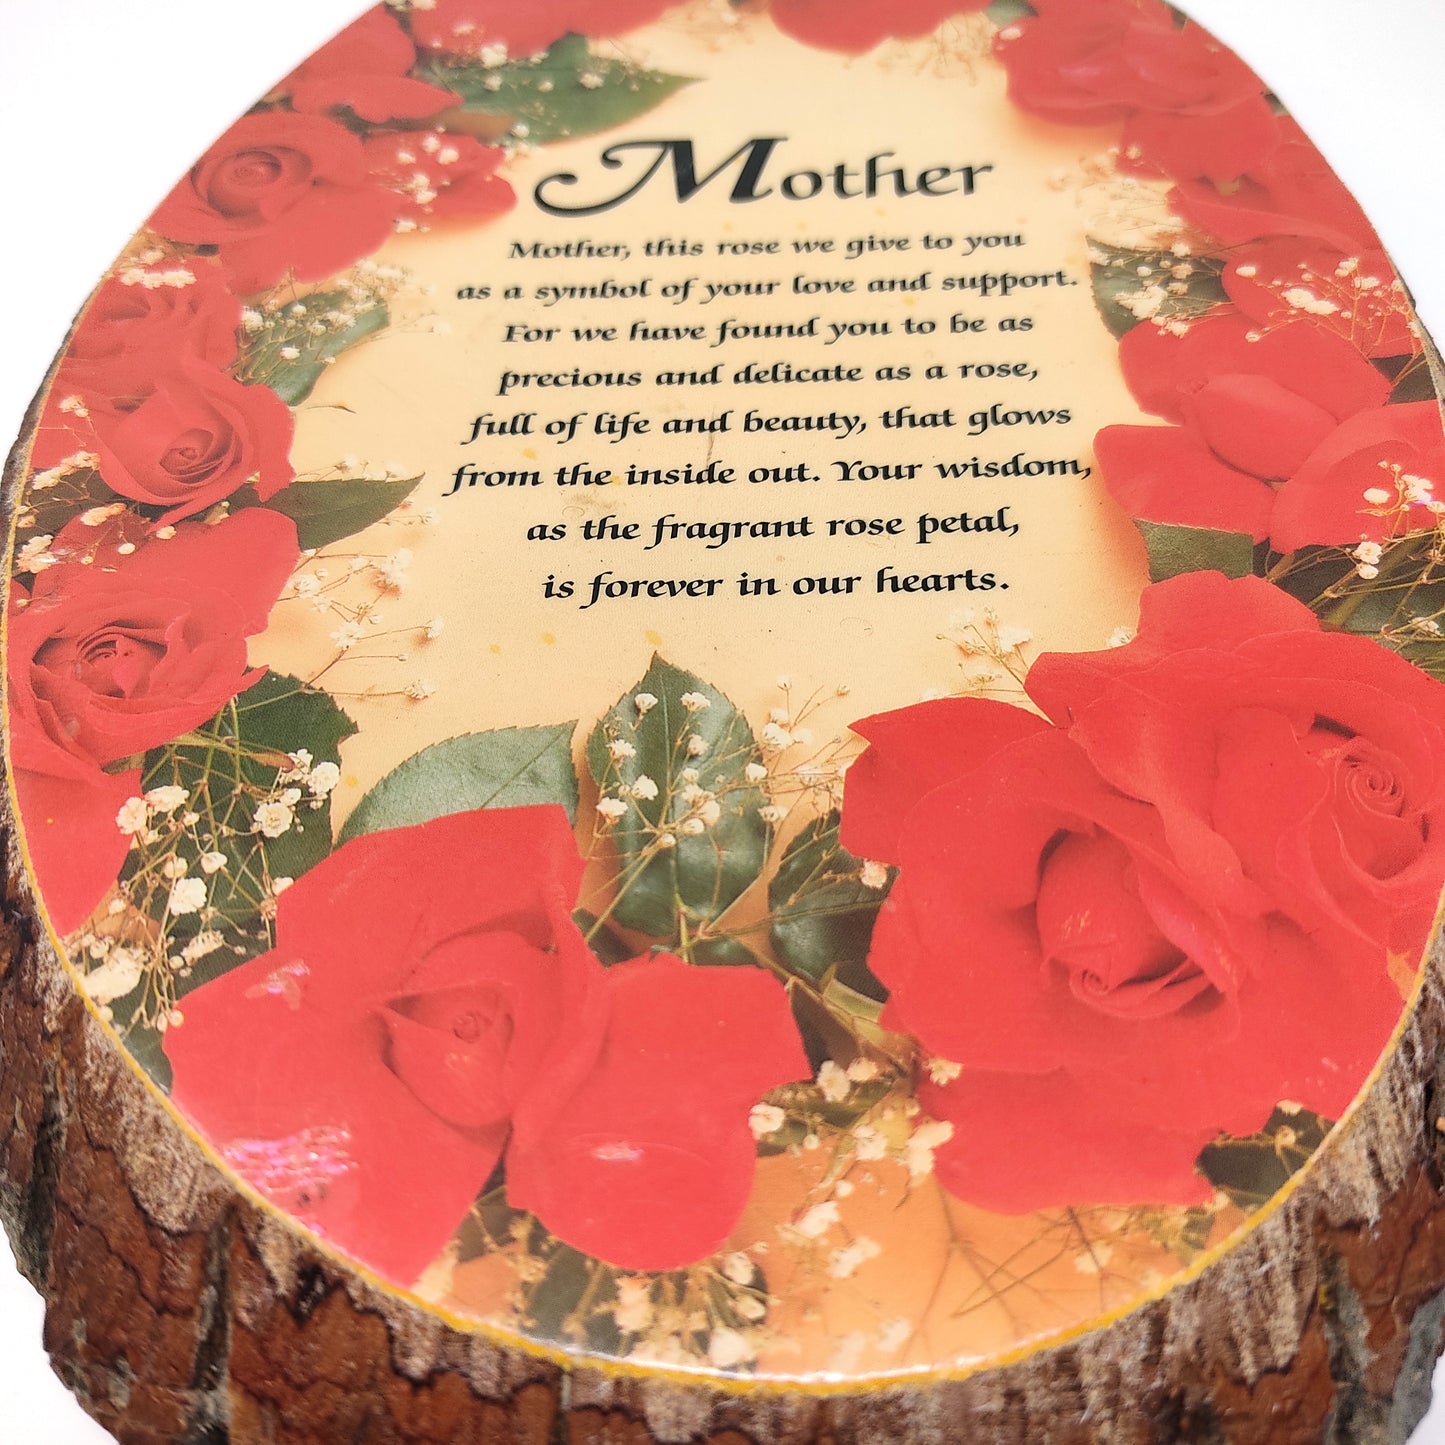 Natural Wood Slab Tree Bark Plaque Wall Hanging Mother Roses Decorative 10" Tall